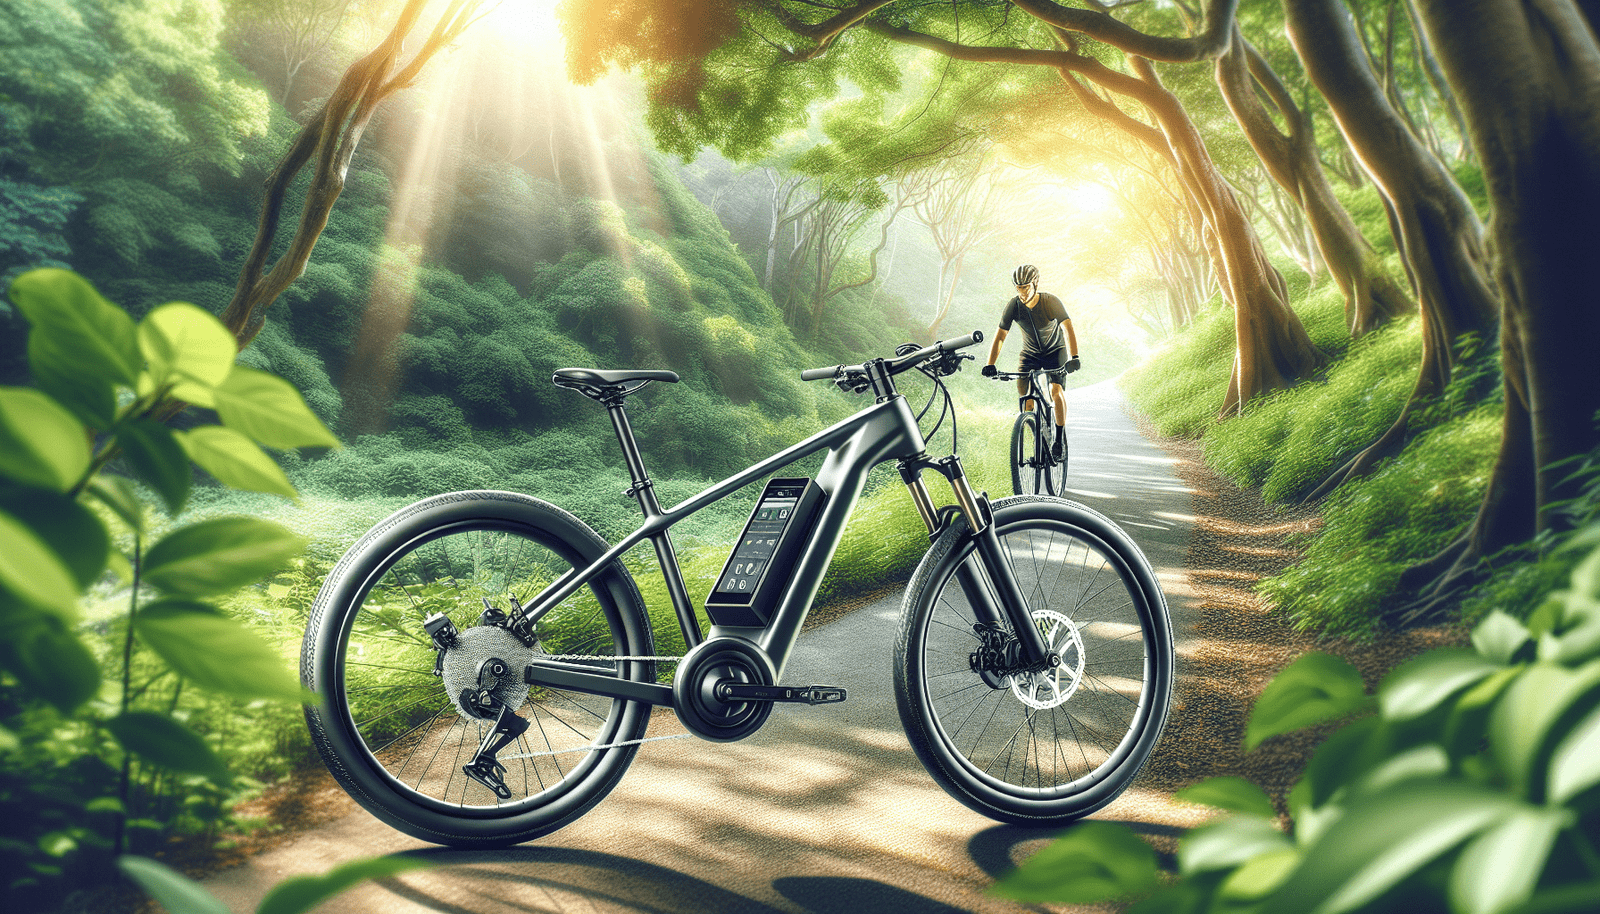 Can I Use An Electric Bike For Fitness Training And Weight Loss?